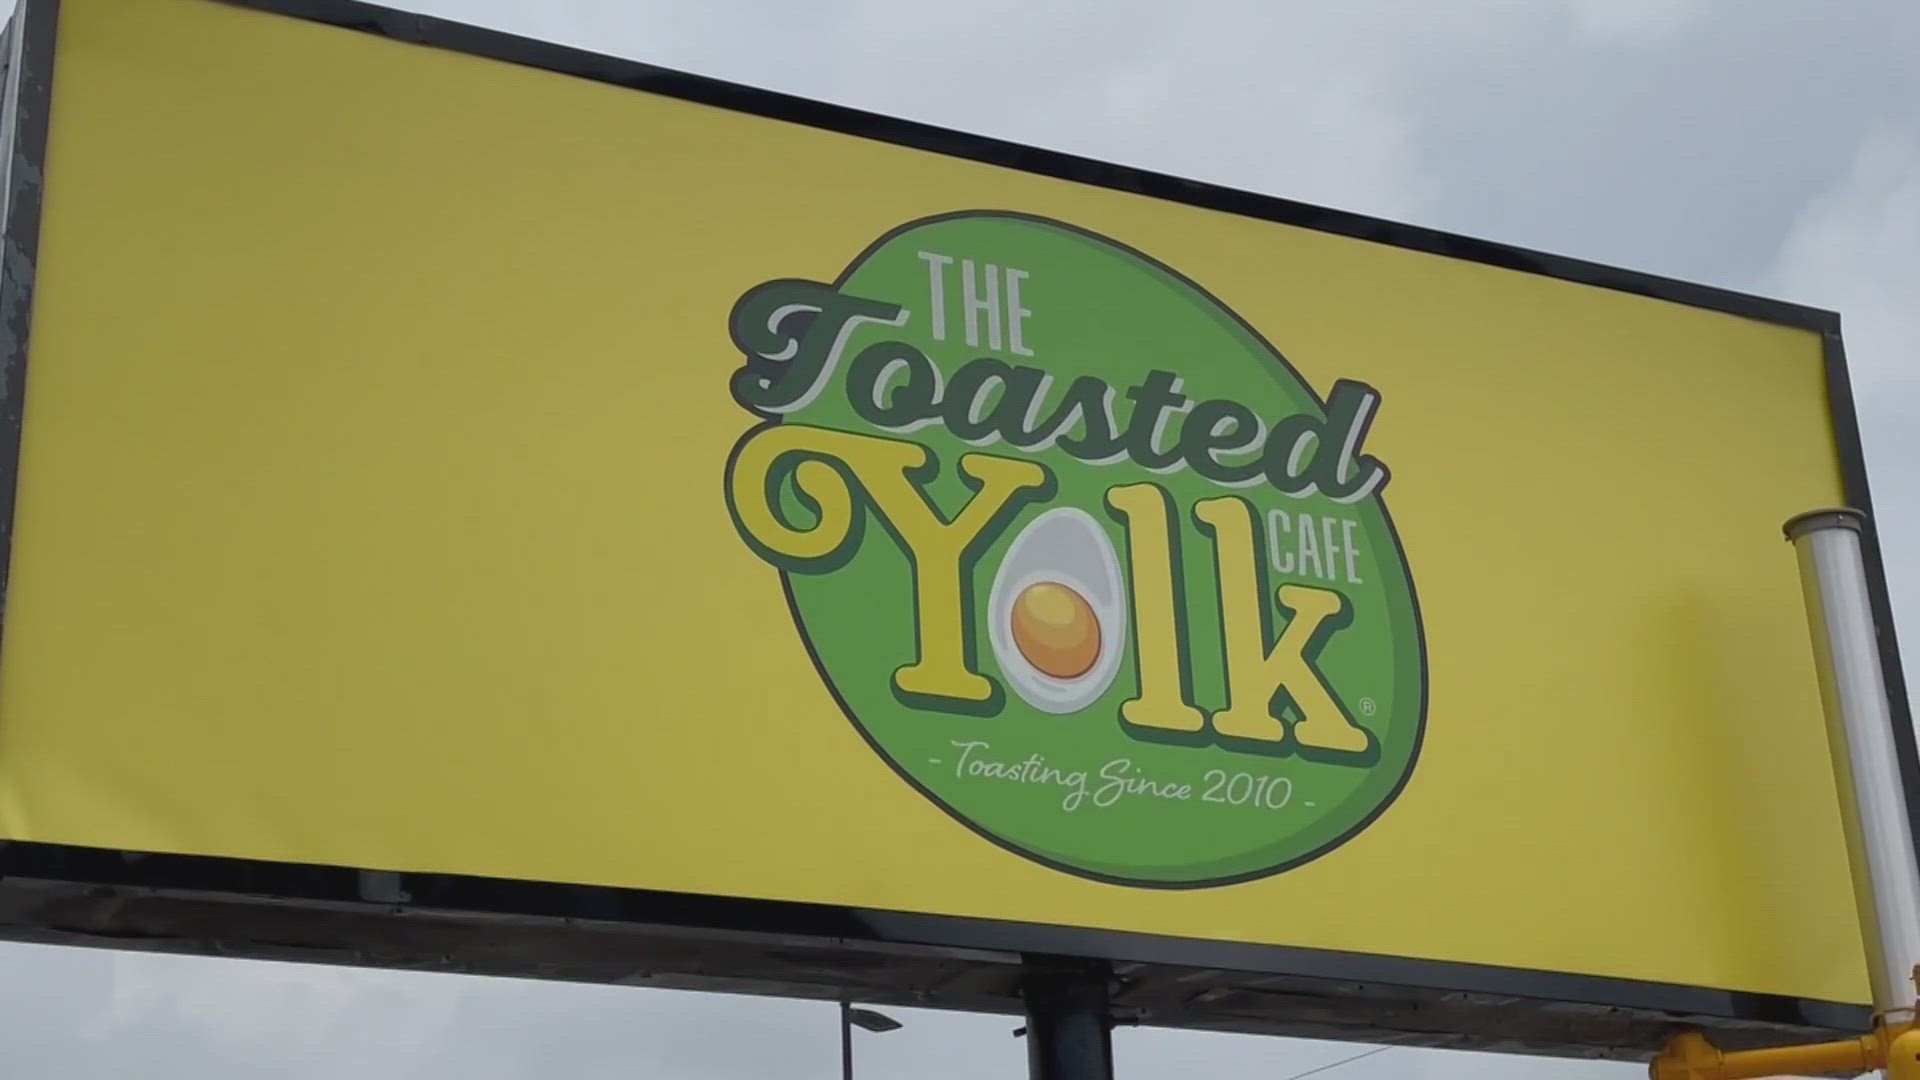 The Toasted Yolk is open everyday from 7 a.m. - 3 p.m.